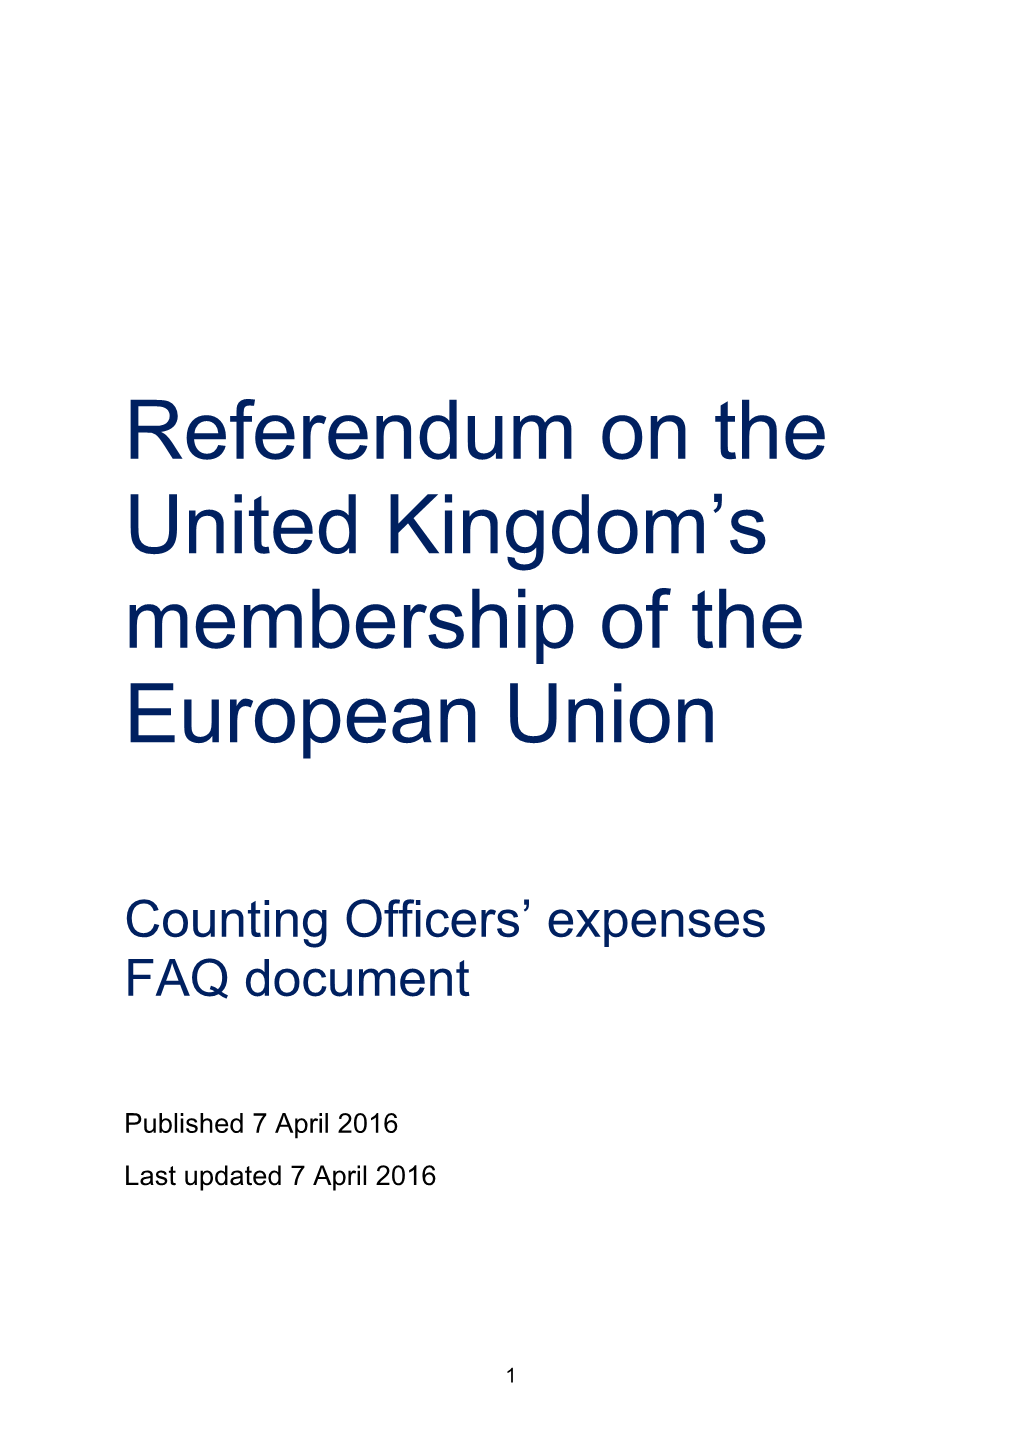 Referendum on the Voting System for UK Parliamentary Elections